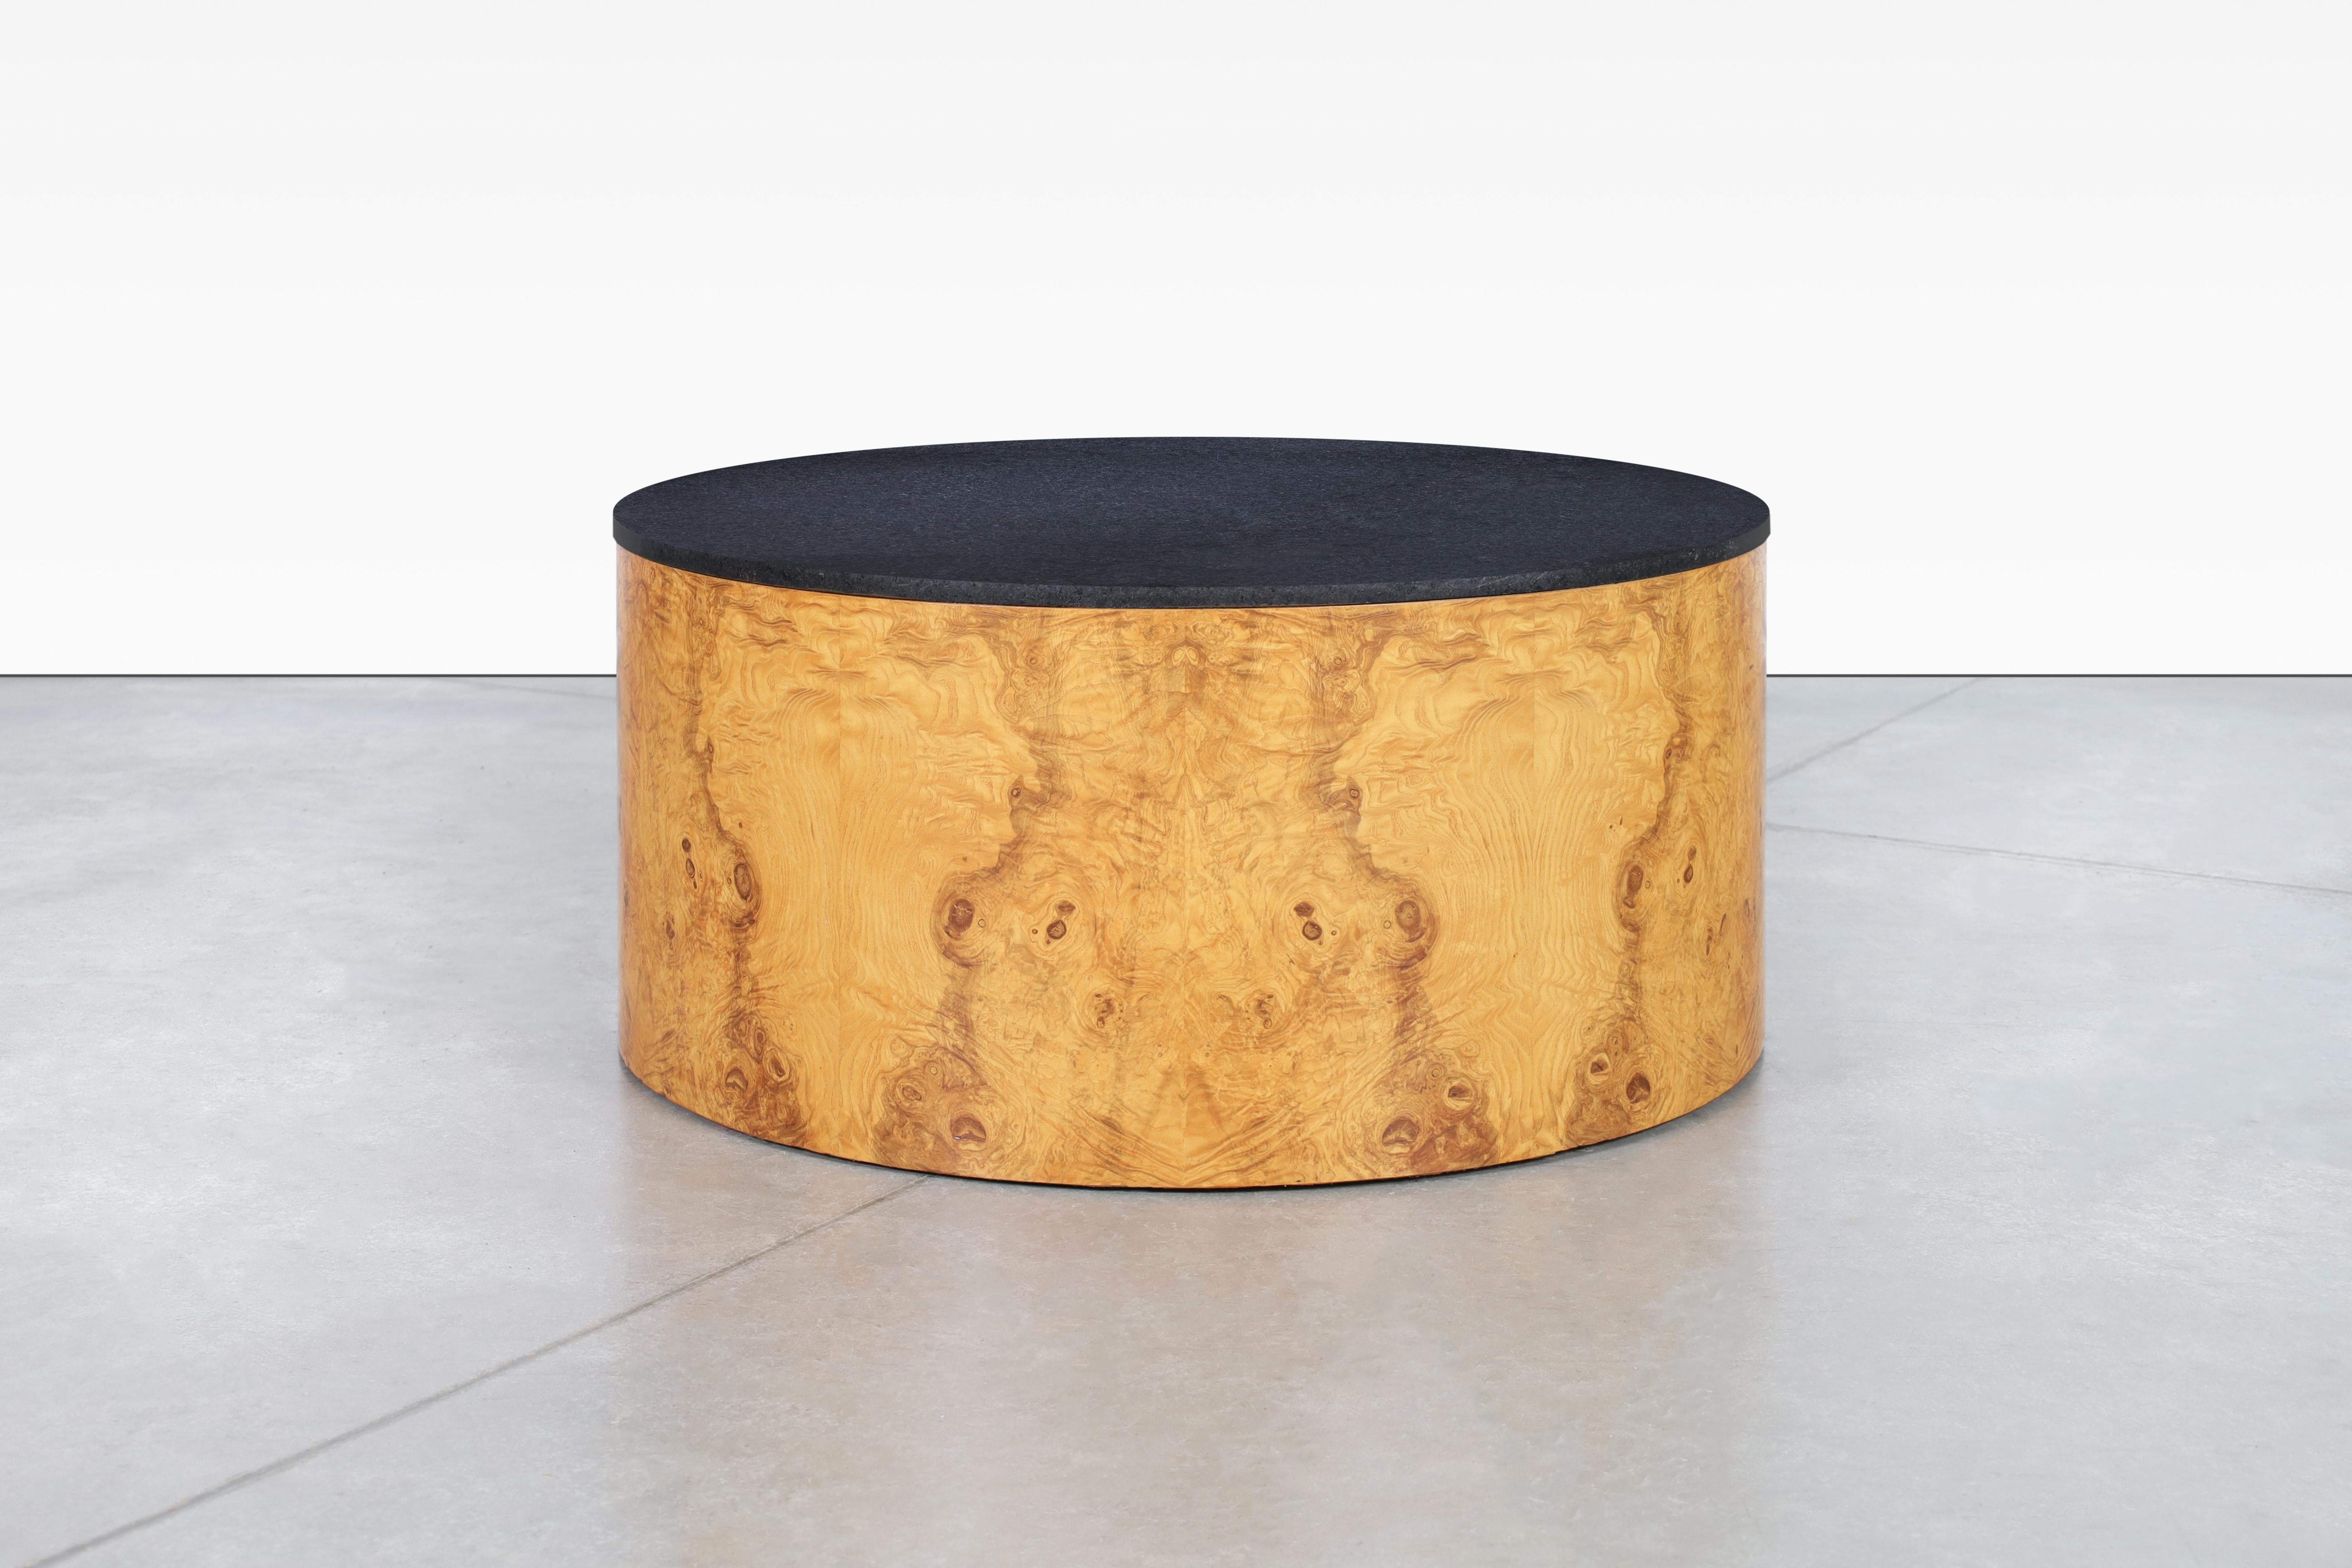 Amazing vintage burl wood and granite “Drum” coffee table, designed by Paul Mayen for Habitat International in USA, circa 1970’s. This exquisite table, professionally restored to its former glory, is crafted from stunning olive burl wood and